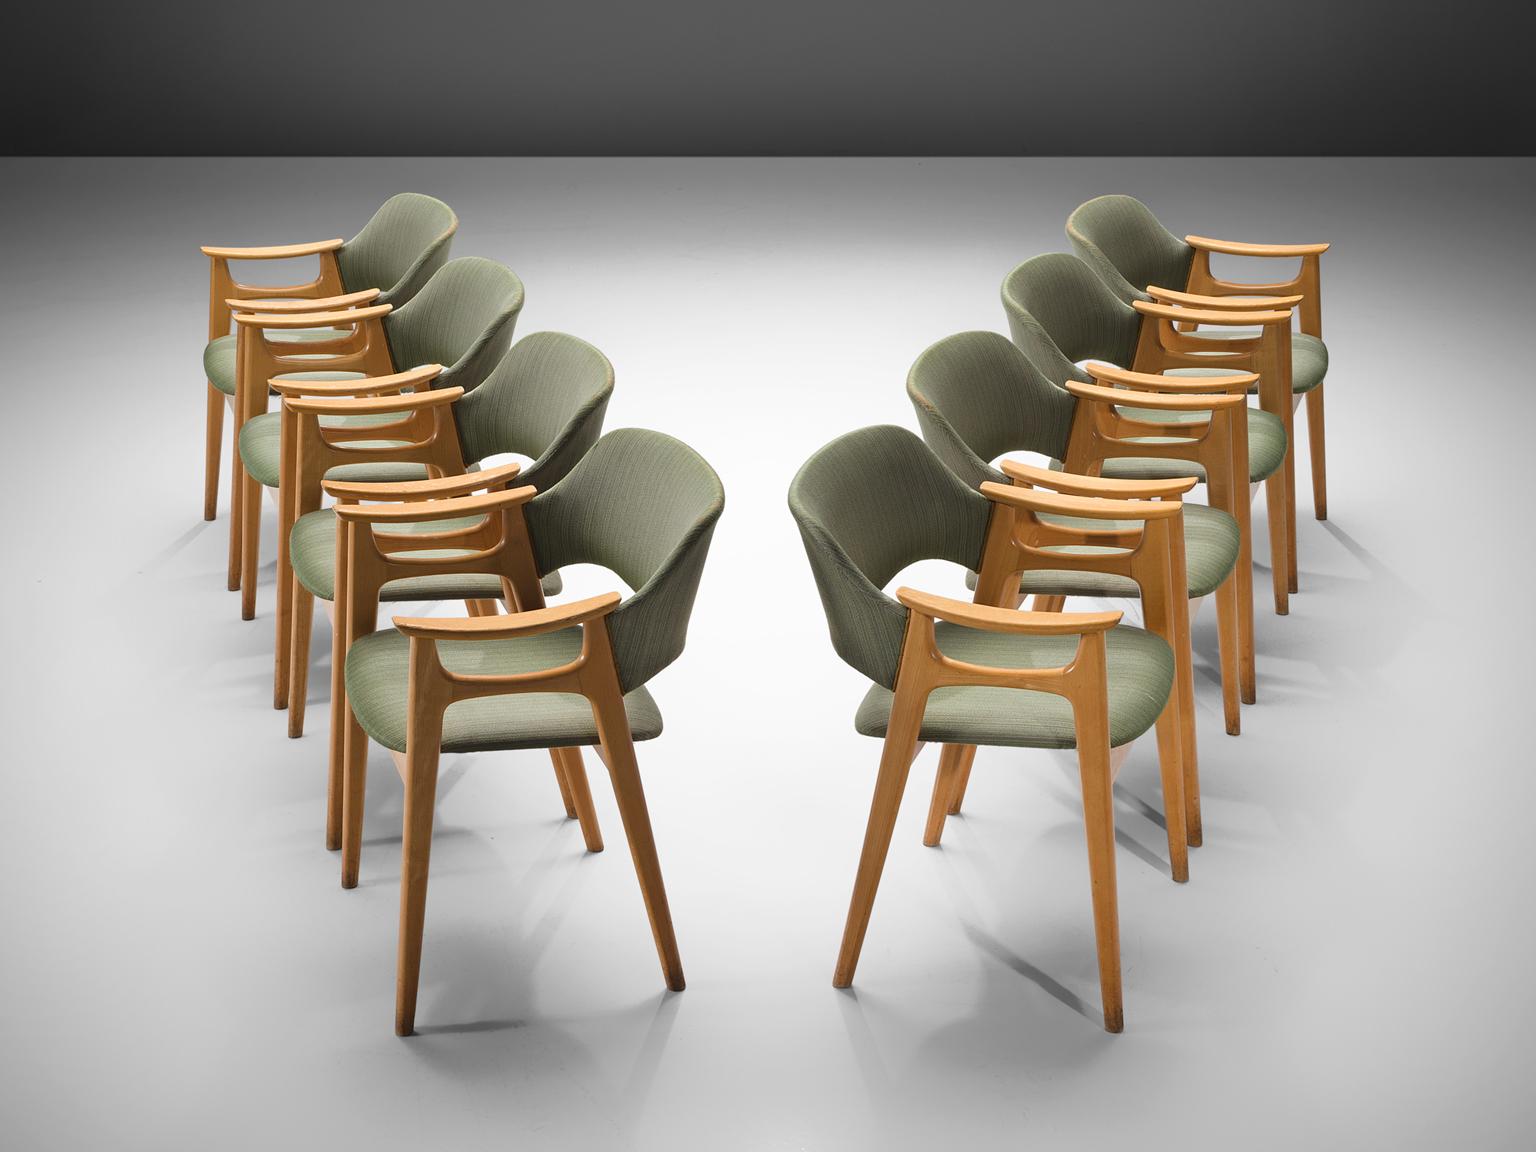 Set of eight chairs, in beech and green fabric, Norway, 1960s.

These Norwegian elegant dining chairs show elegant lines and stunning wood connections. The visually almost floating seat with the well sized back, provide great comfort. The natural